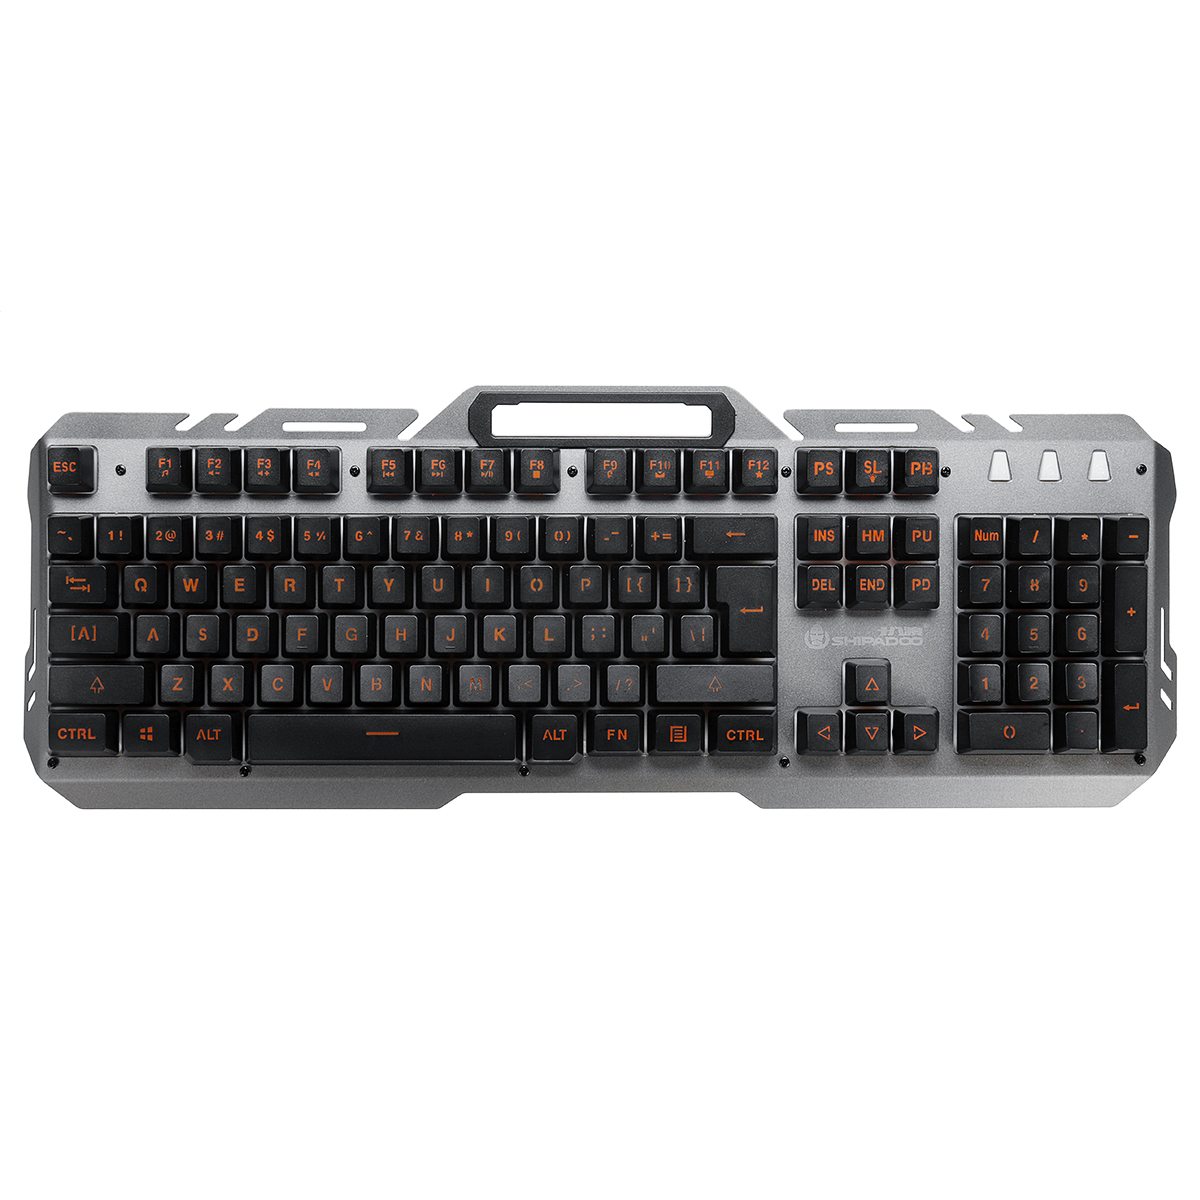 Shipadoo 104 Keys USB Wired Dual-Color Injection Molding Translucent Keycap Backlit Mechanical Handfeel Gaming Keyboard with Phone Support 1